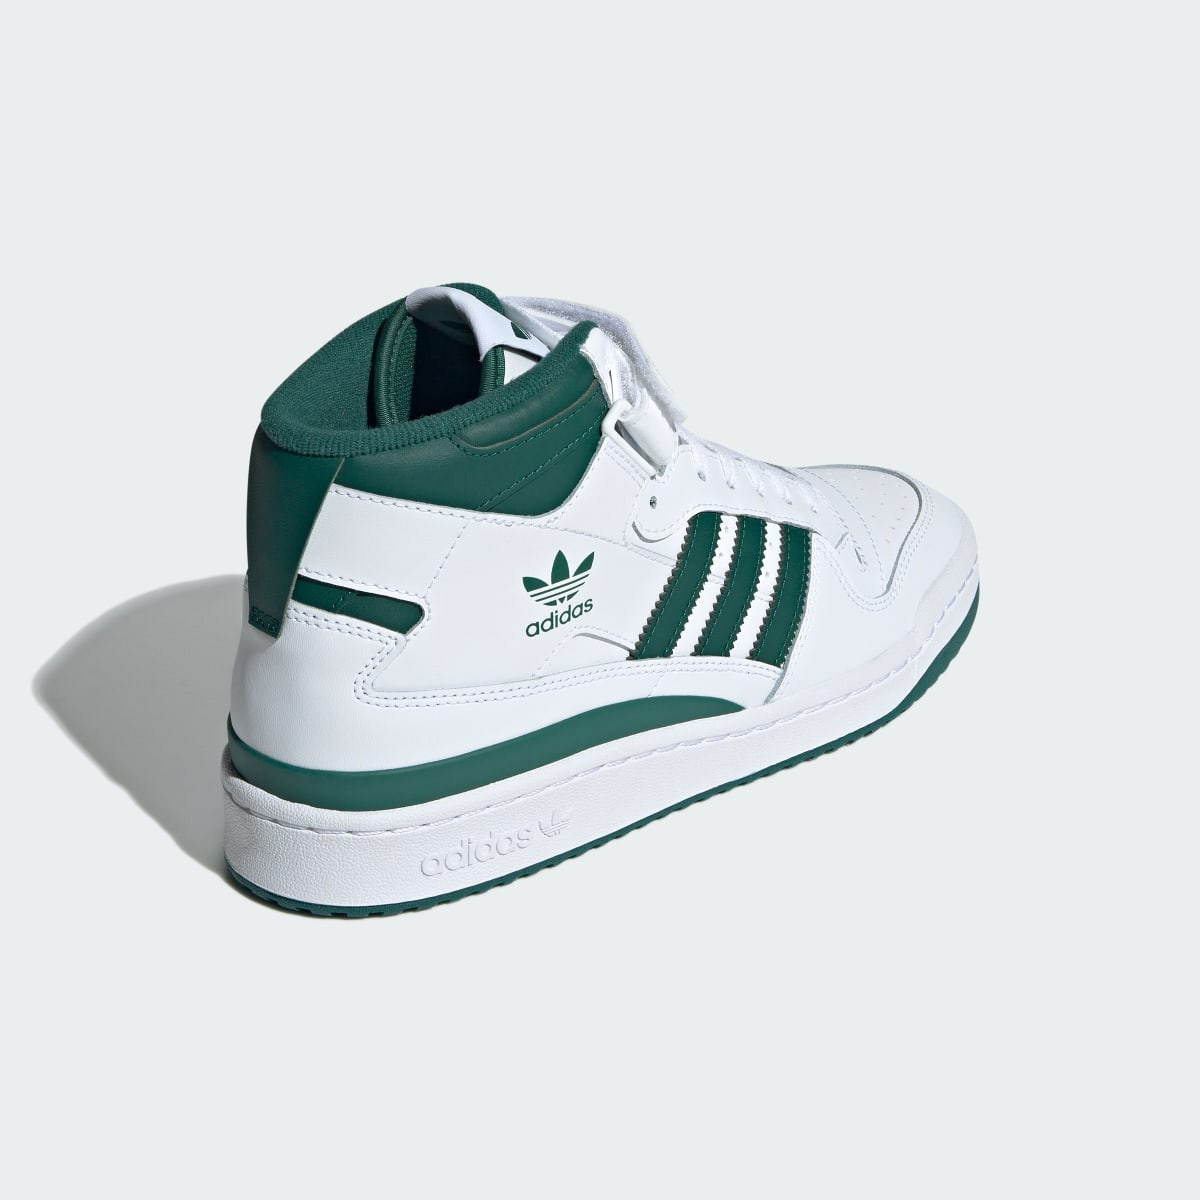 Adidas Forum Mid Shoes. 6